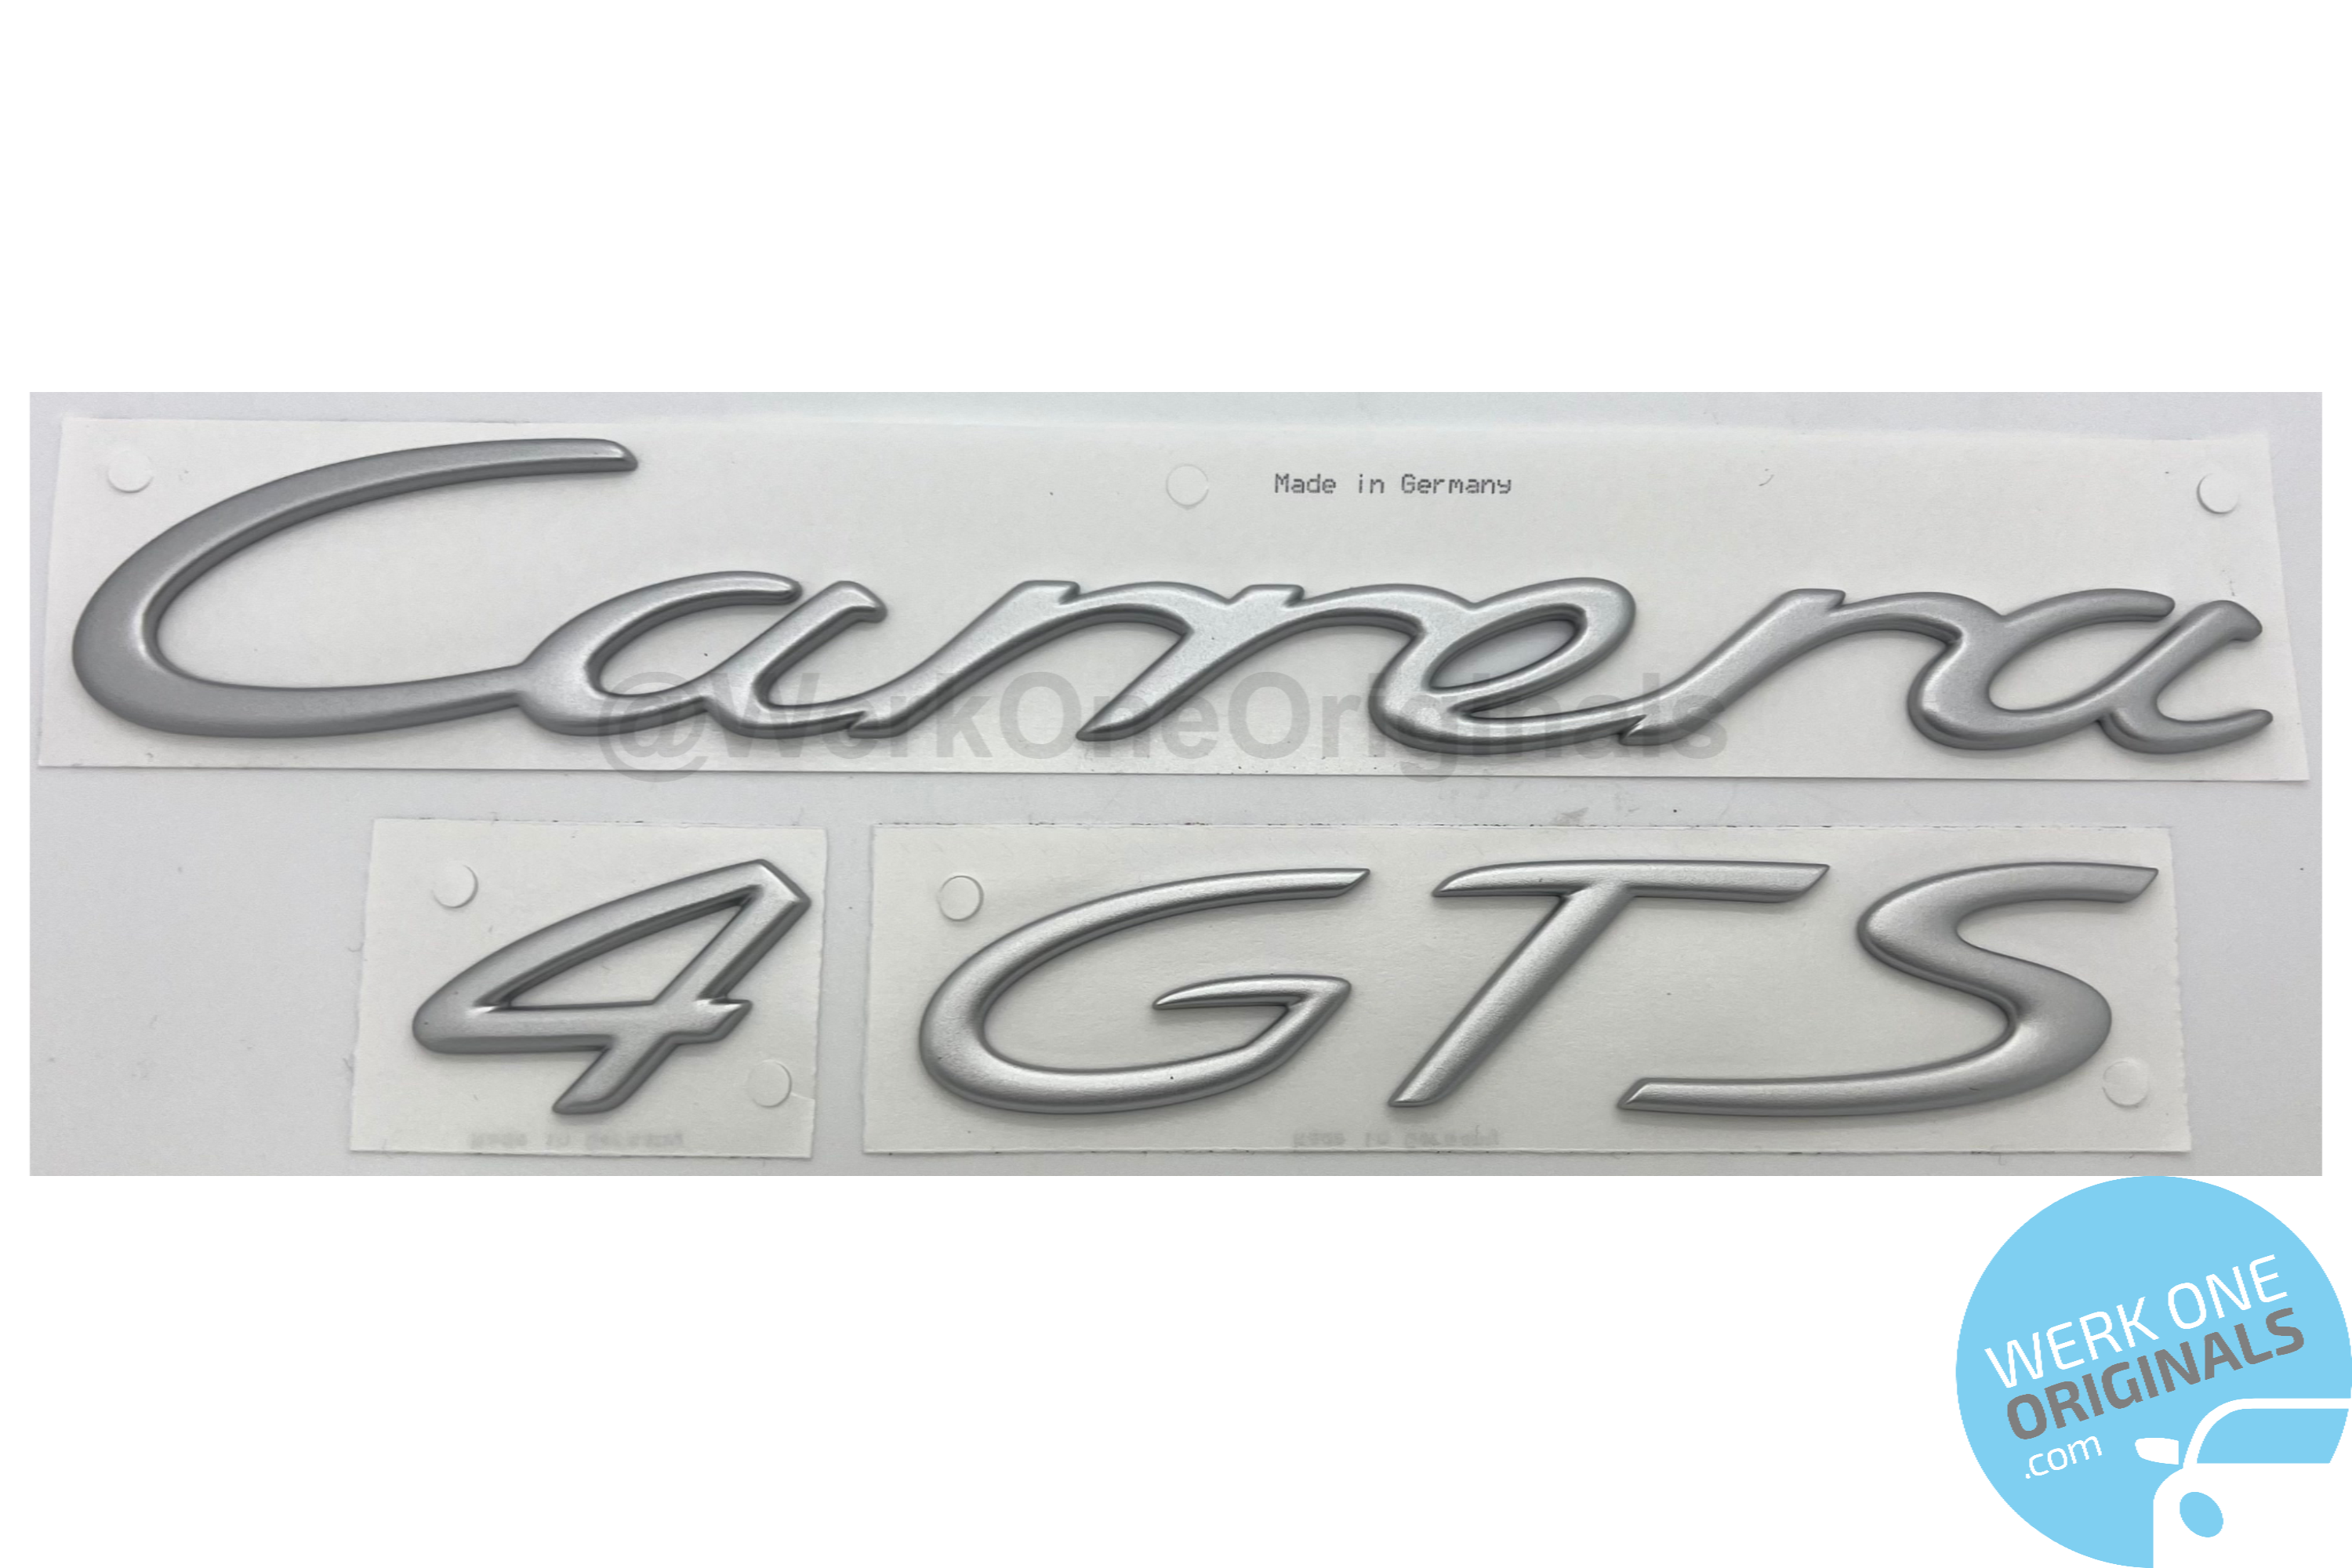 Porsche Official 'Carrera 4 GTS' Rear Badge Decal in Matte Silver for 911 Type 997 Carrera 4 GTS Models